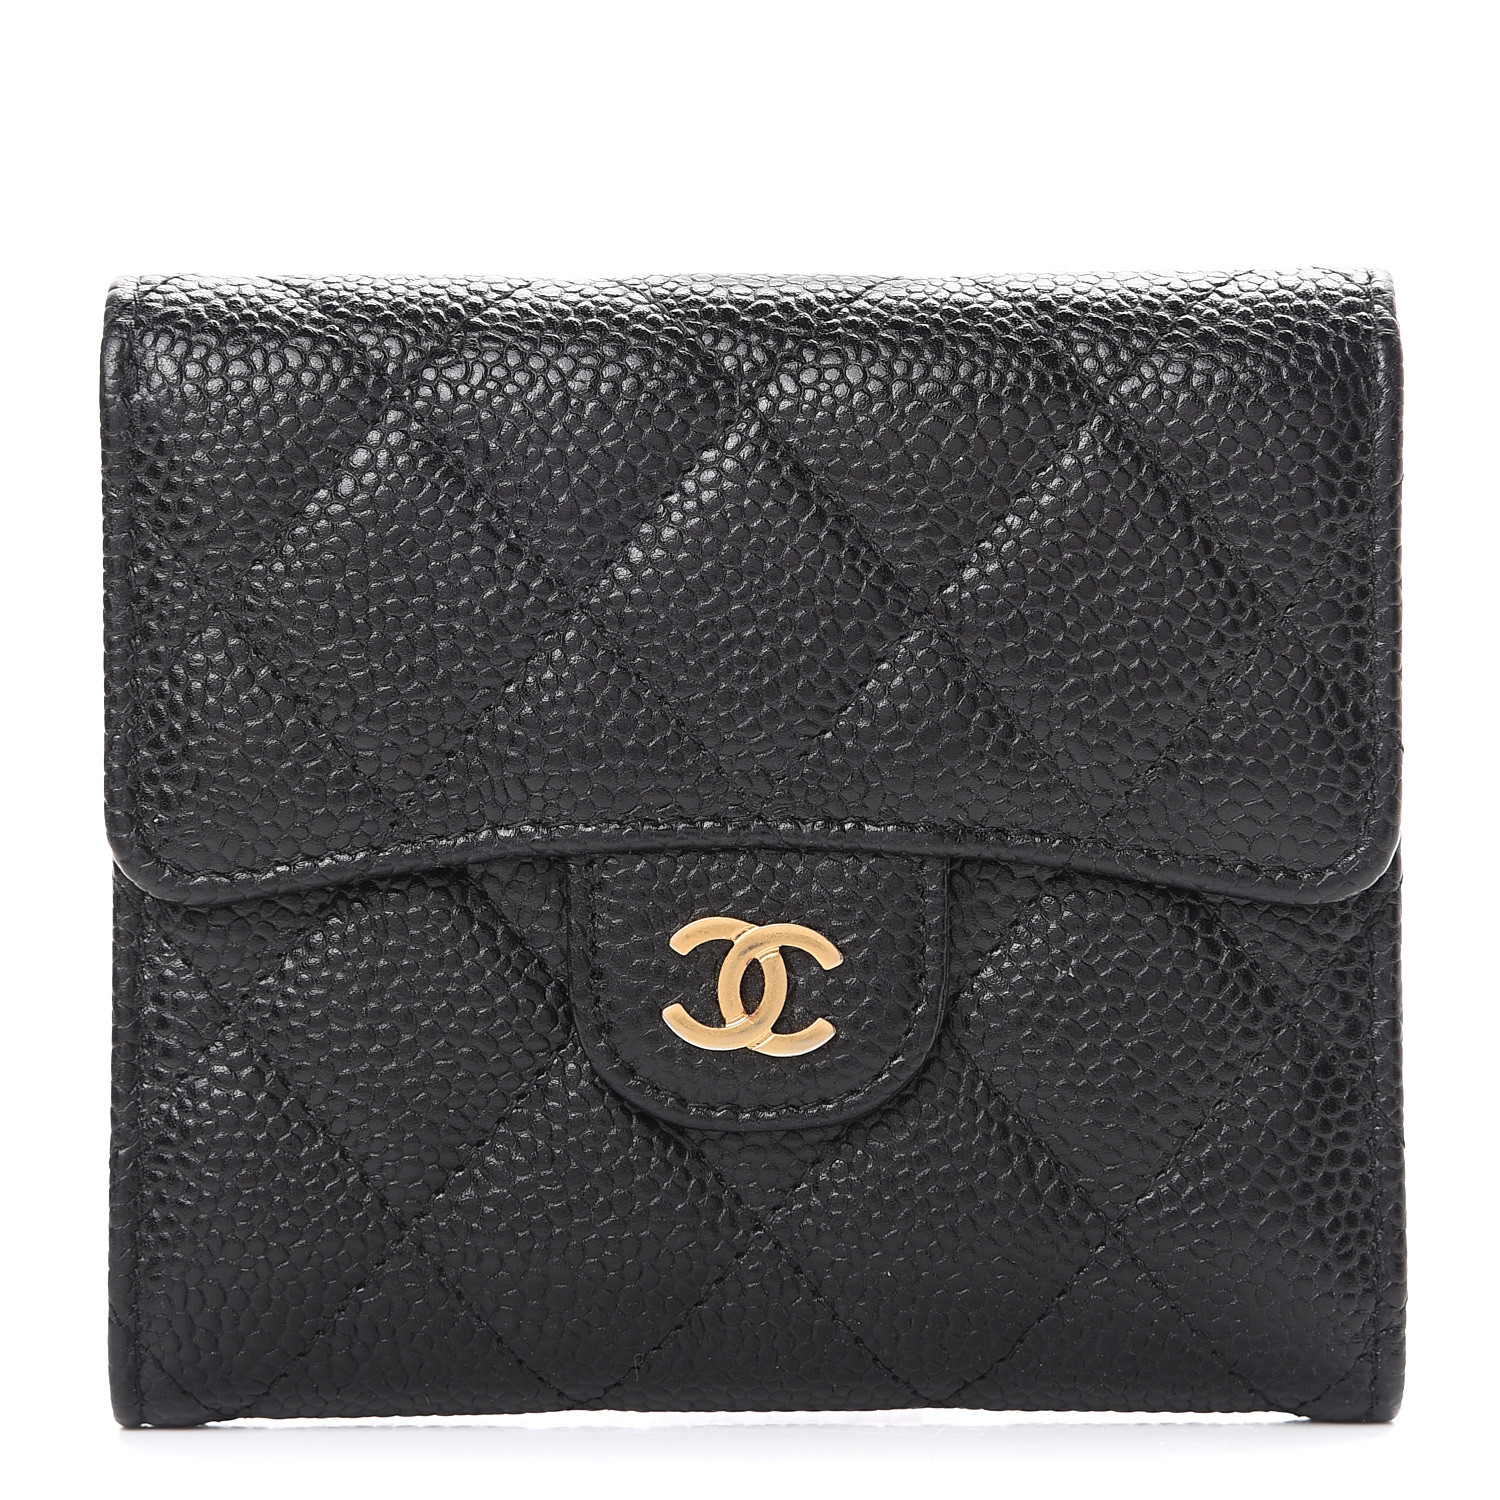 CHANEL Caviar Quilted Compact Flap Wallet Black 577221 | FASHIONPHILE